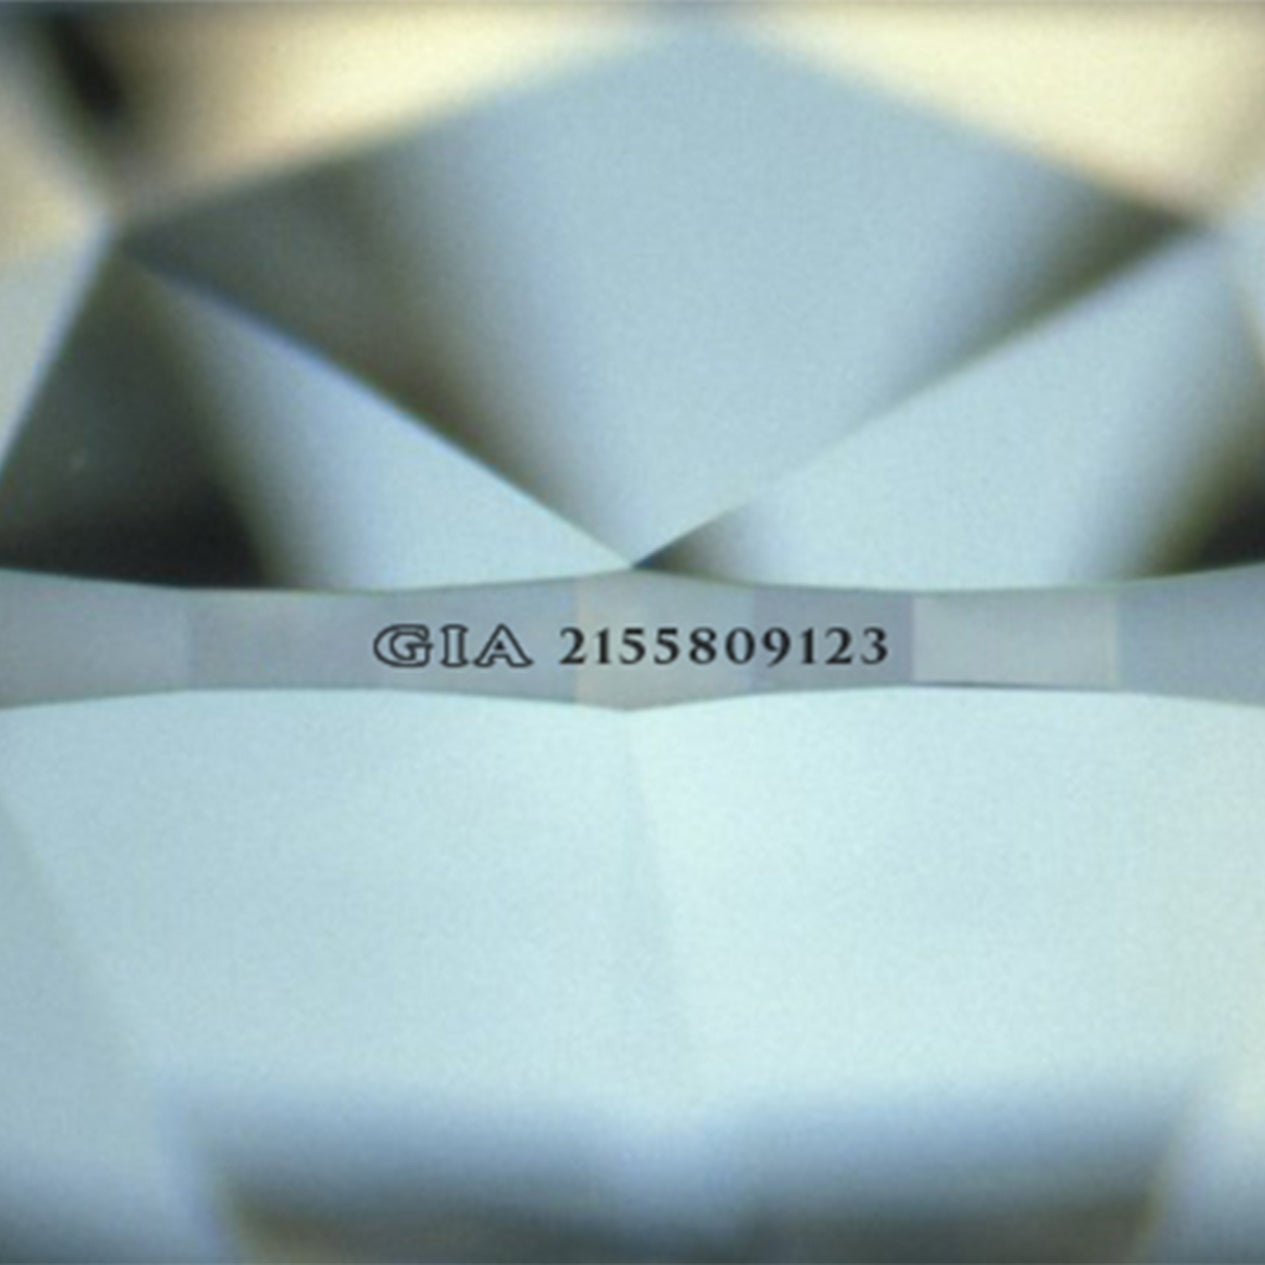 Shimansky Jewellery GIA certification number location.